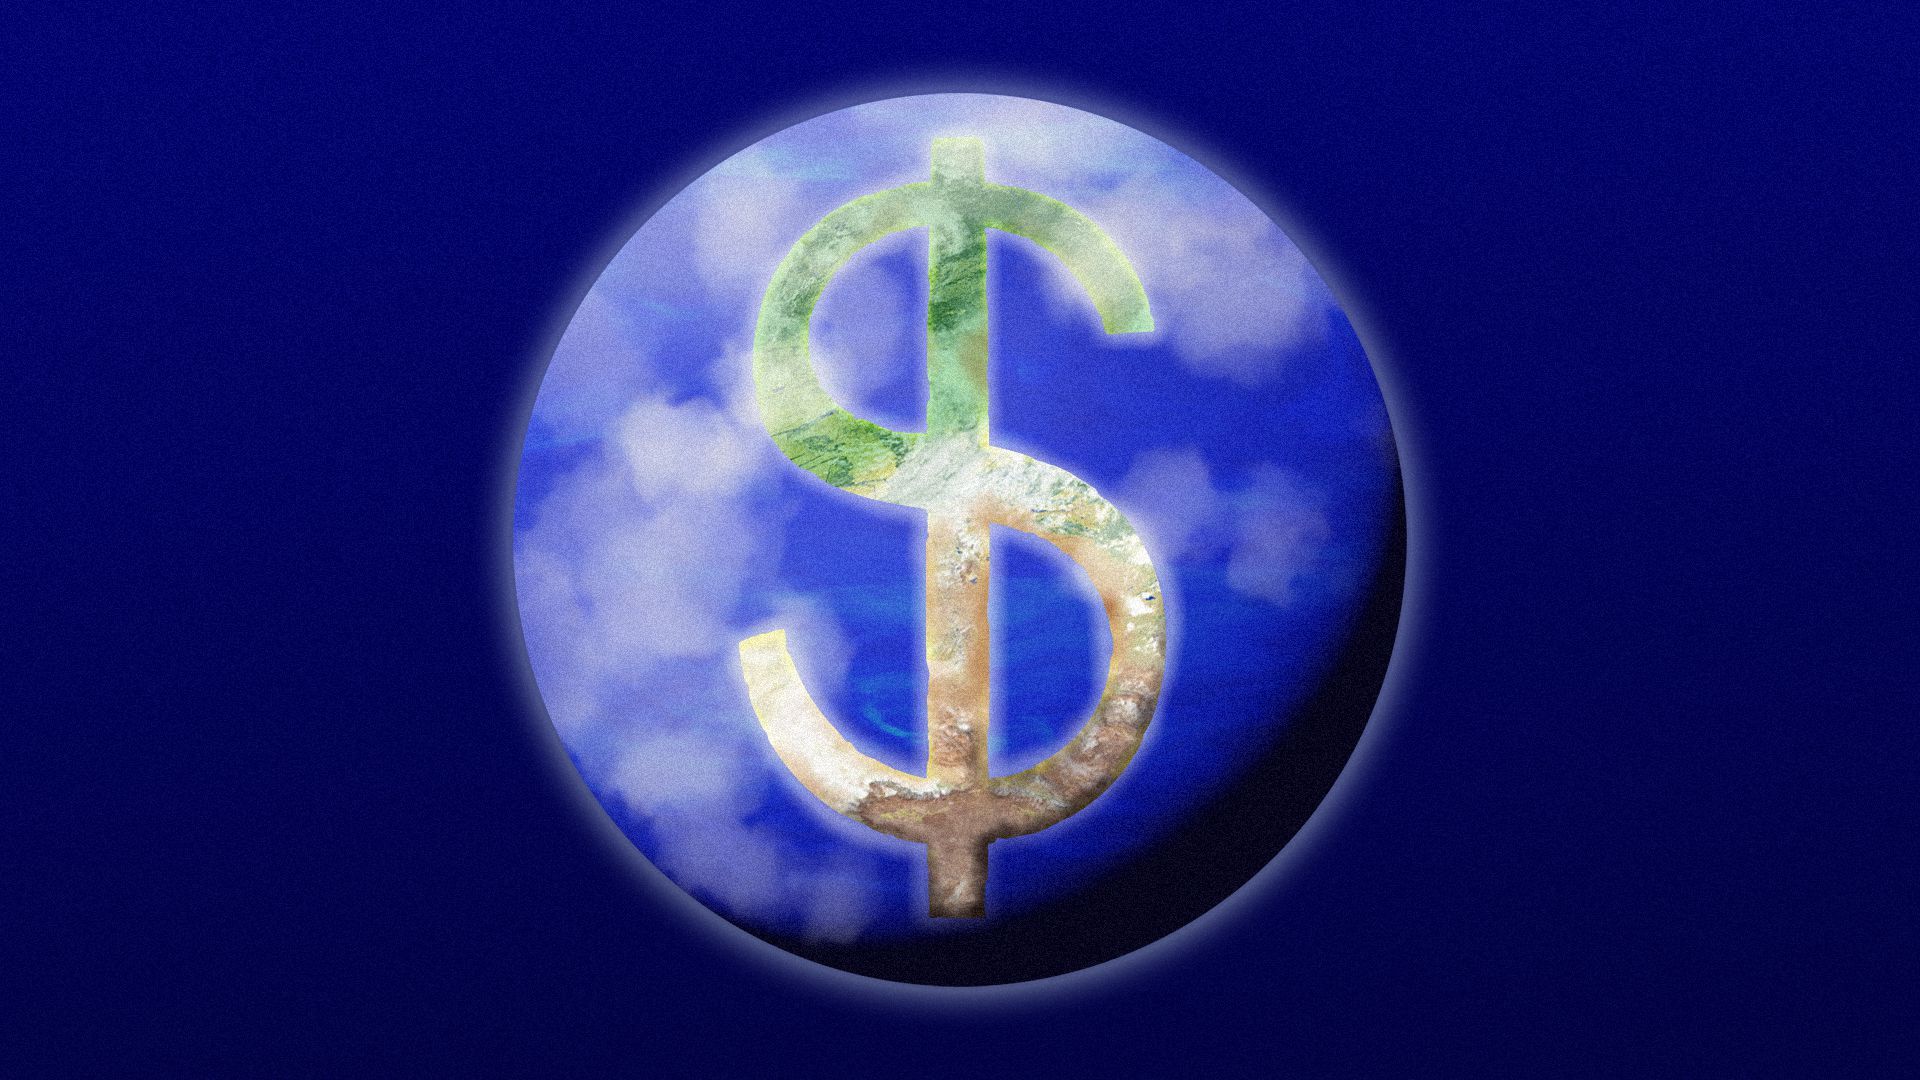 lllustration of the earth with a continent in the shape of a dollar sign